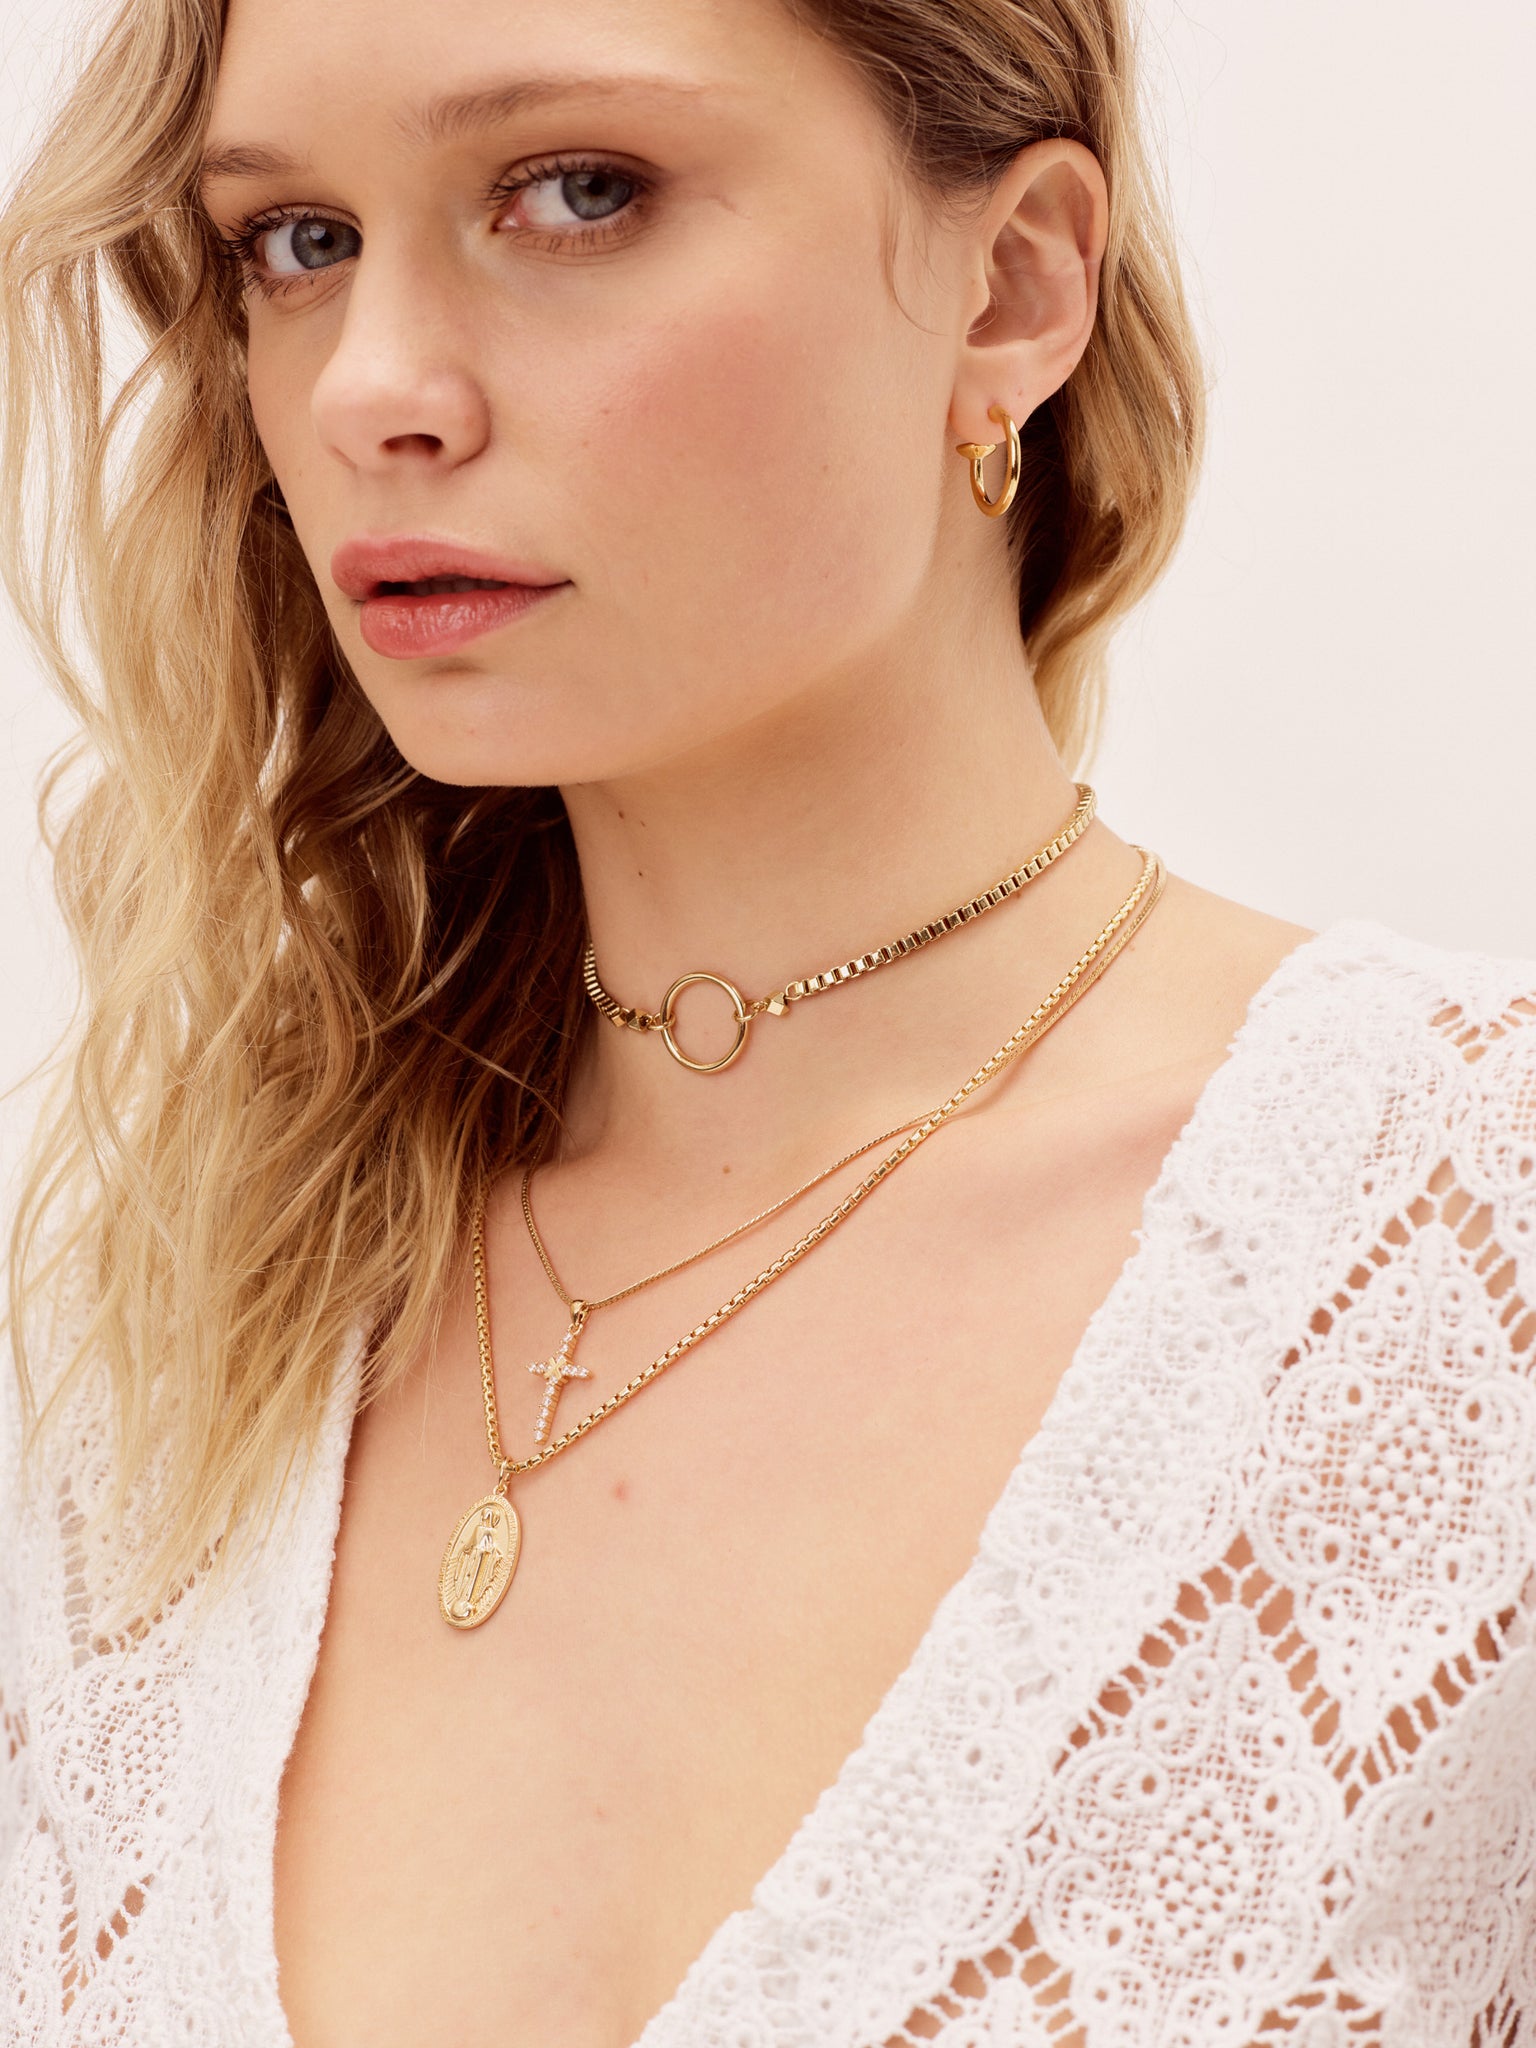 Forever Young Choker Necklace